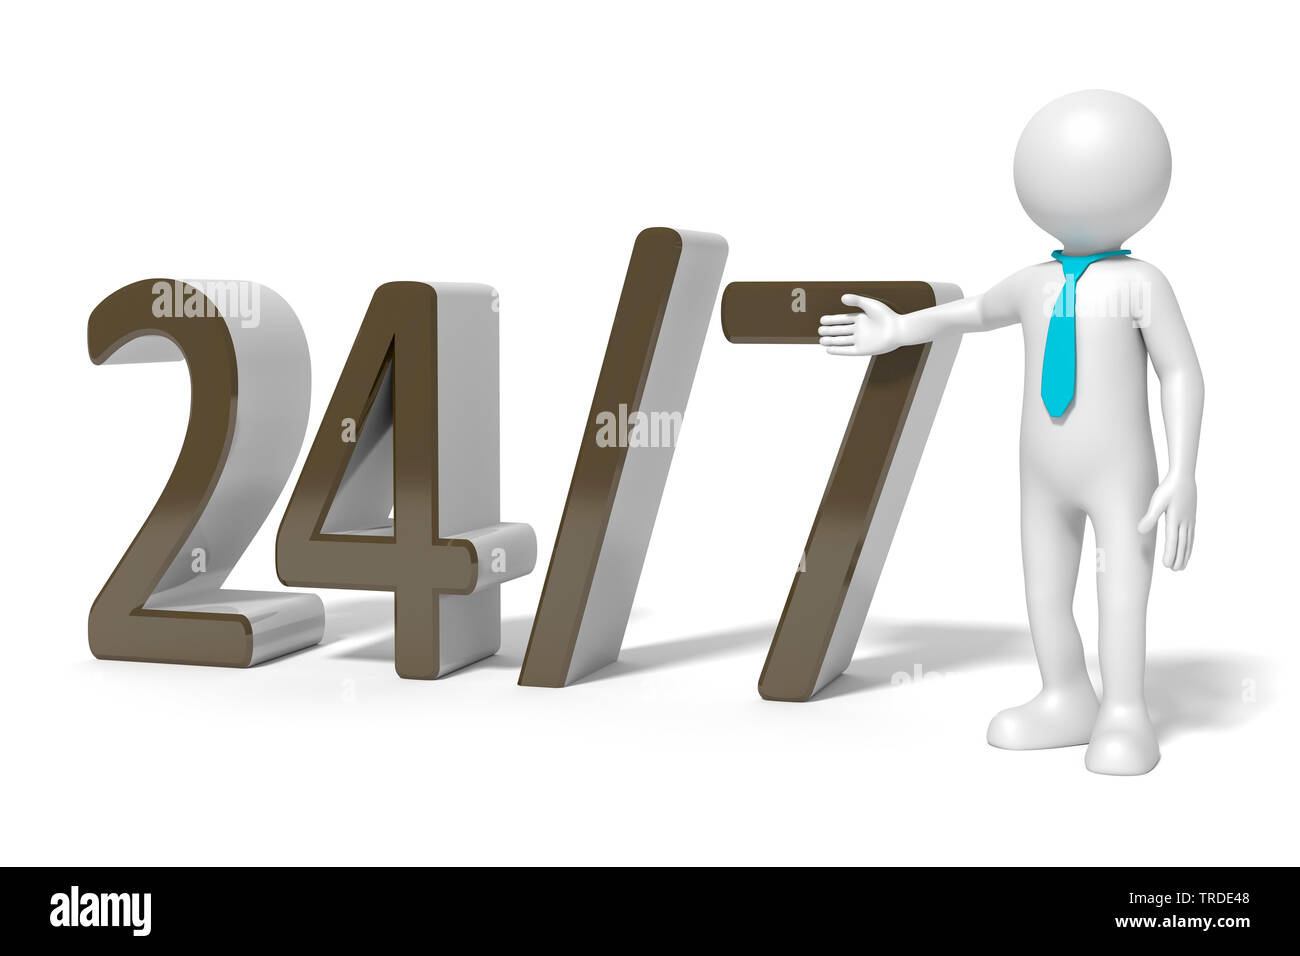 3D icon man in white color pointing towards an oversized lettering 24/7; against white background Stock Photo